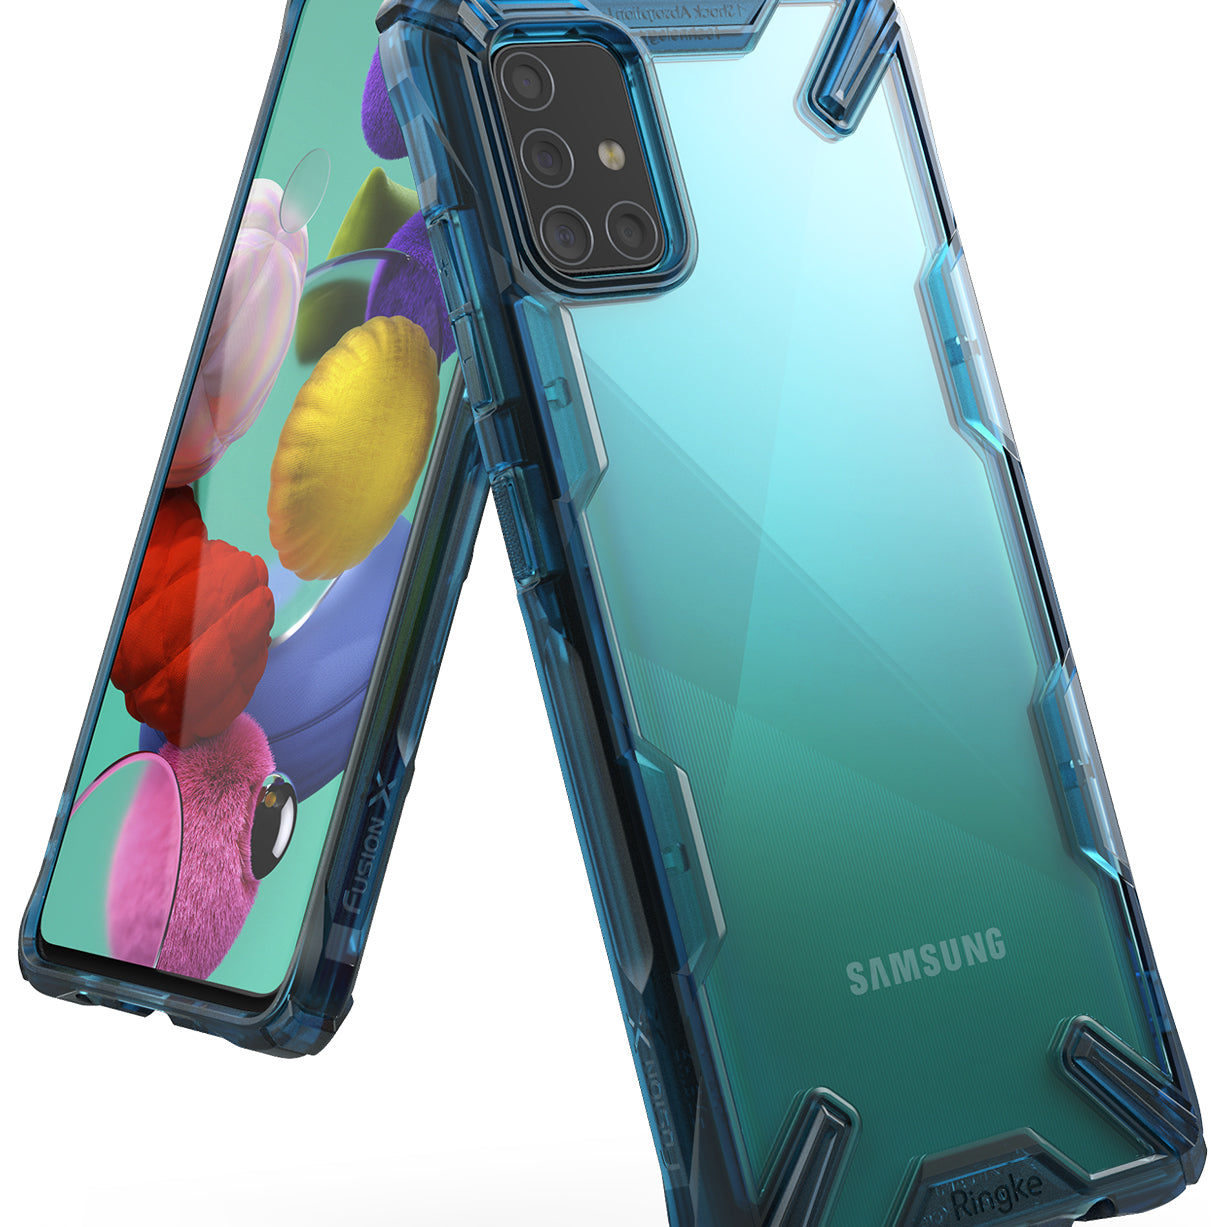 ringke galaxy a51 fusion-x space blue color case